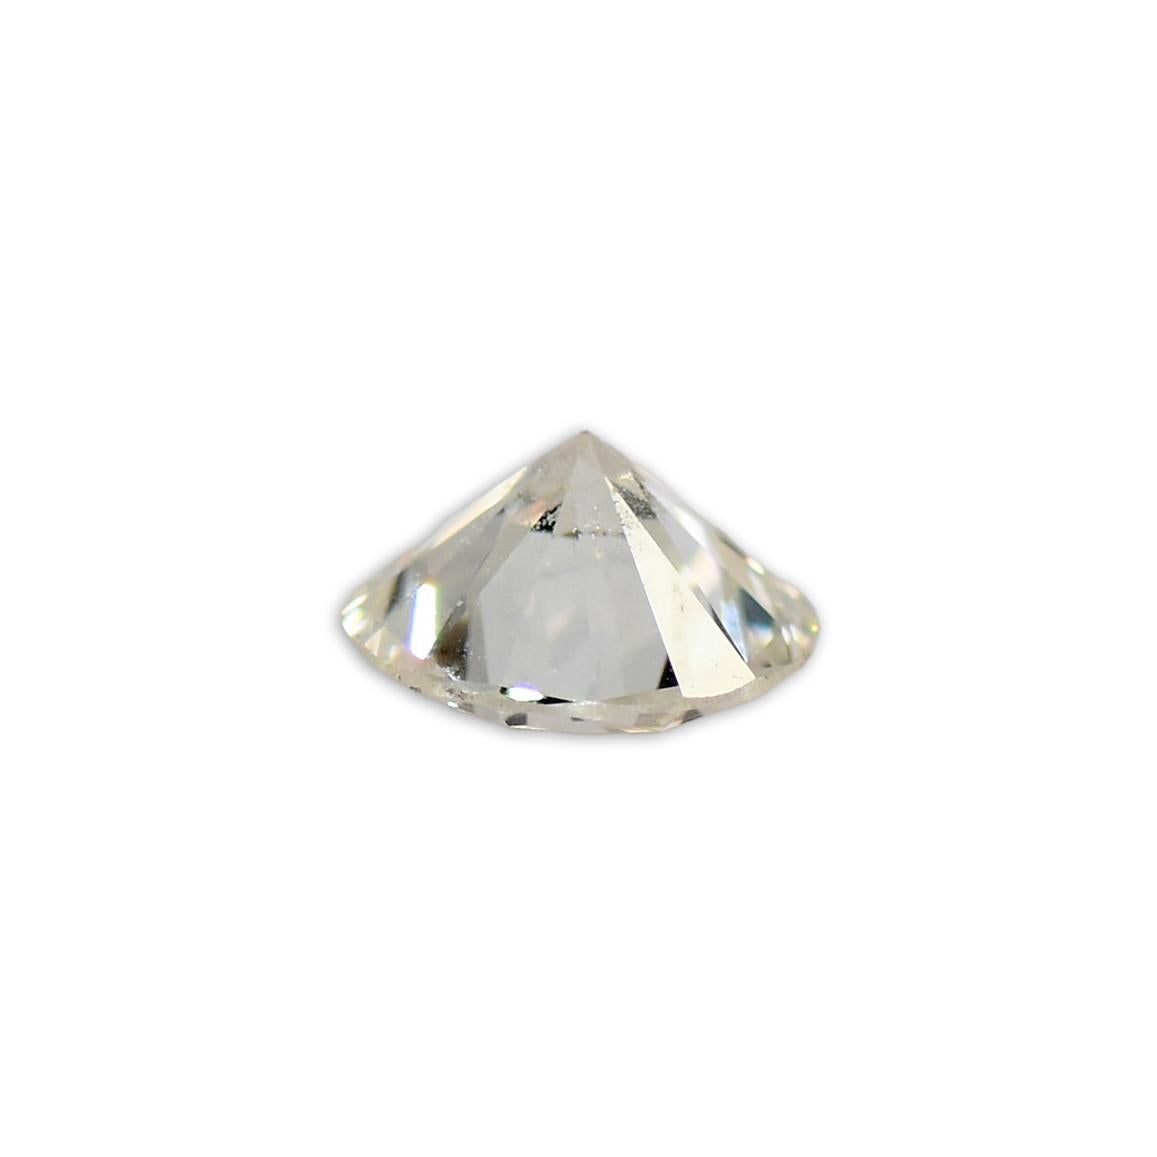 Loose round brilliant diamond, .68 carats.
GIA-graded H color, VS1 clarity, symmetry is good.
The GIA grading report number is 2221722902.
Very brilliant diamond.
Comes with a full grading certificate.